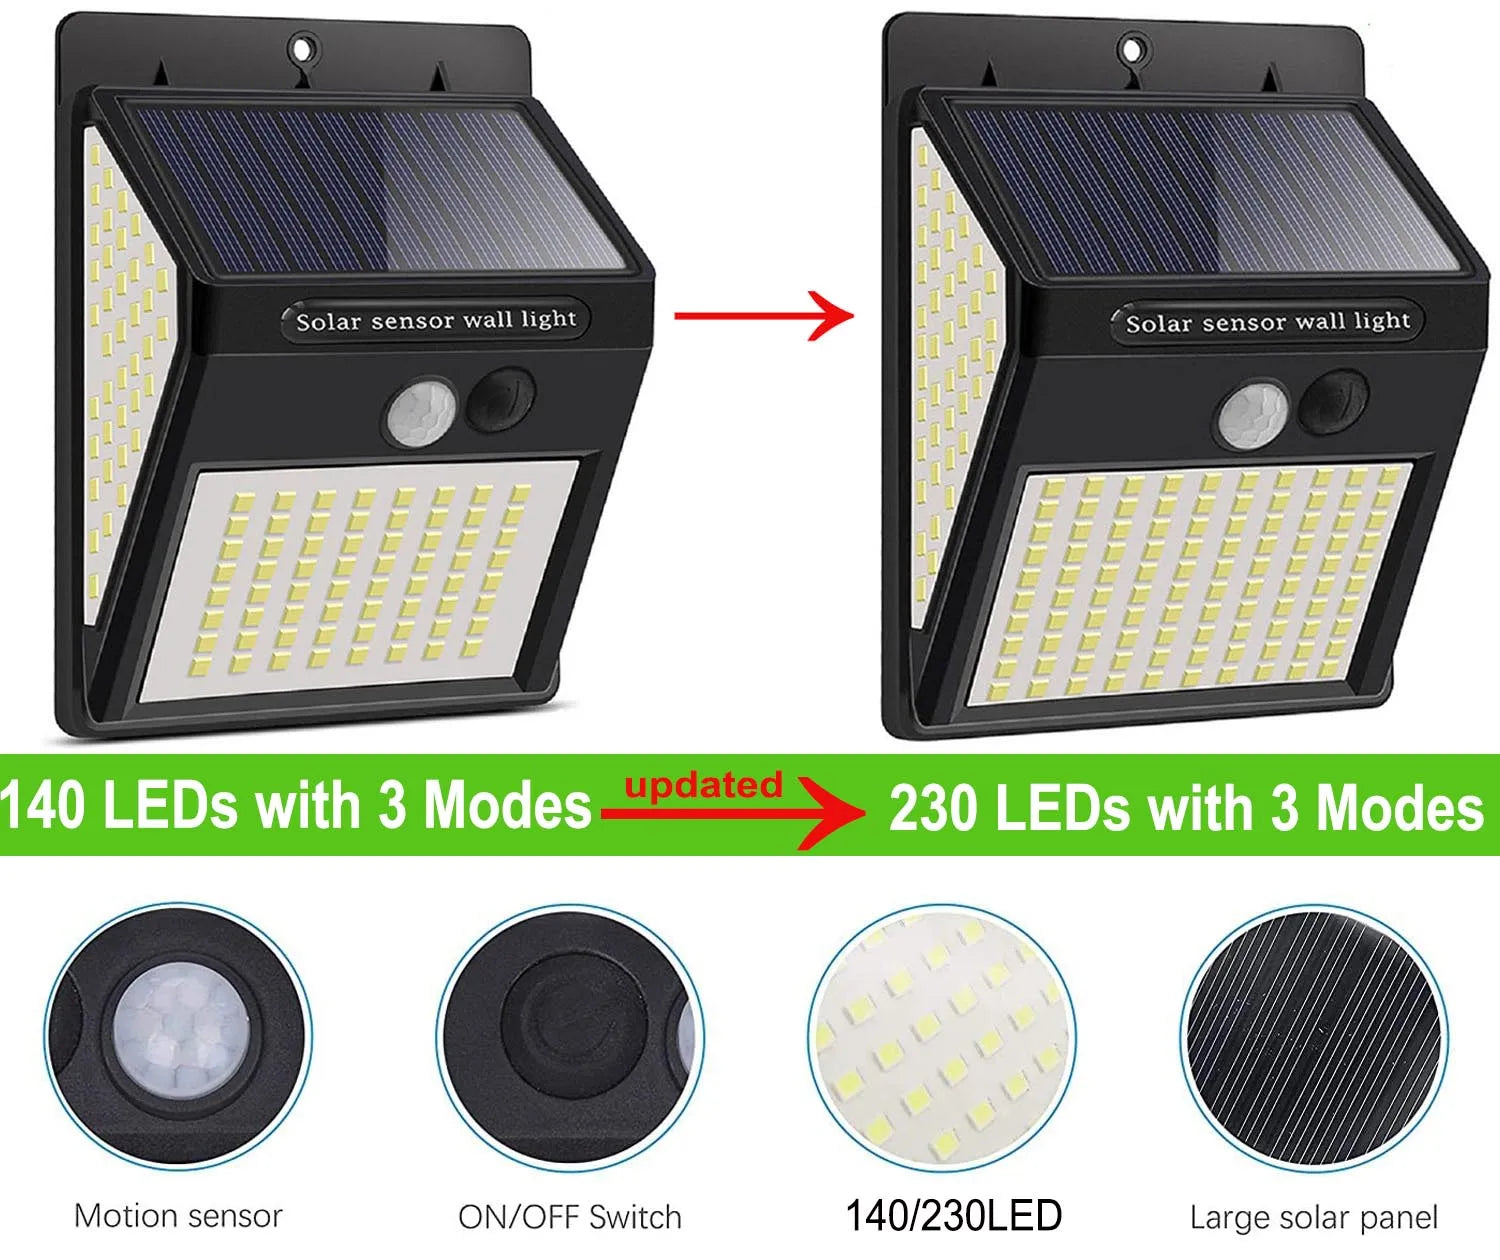 230 LED Solar Outdoor Garden Light, Solar-powered LED spotlight with motion sensor, 3 modes, and on/off switch for easy outdoor lighting.